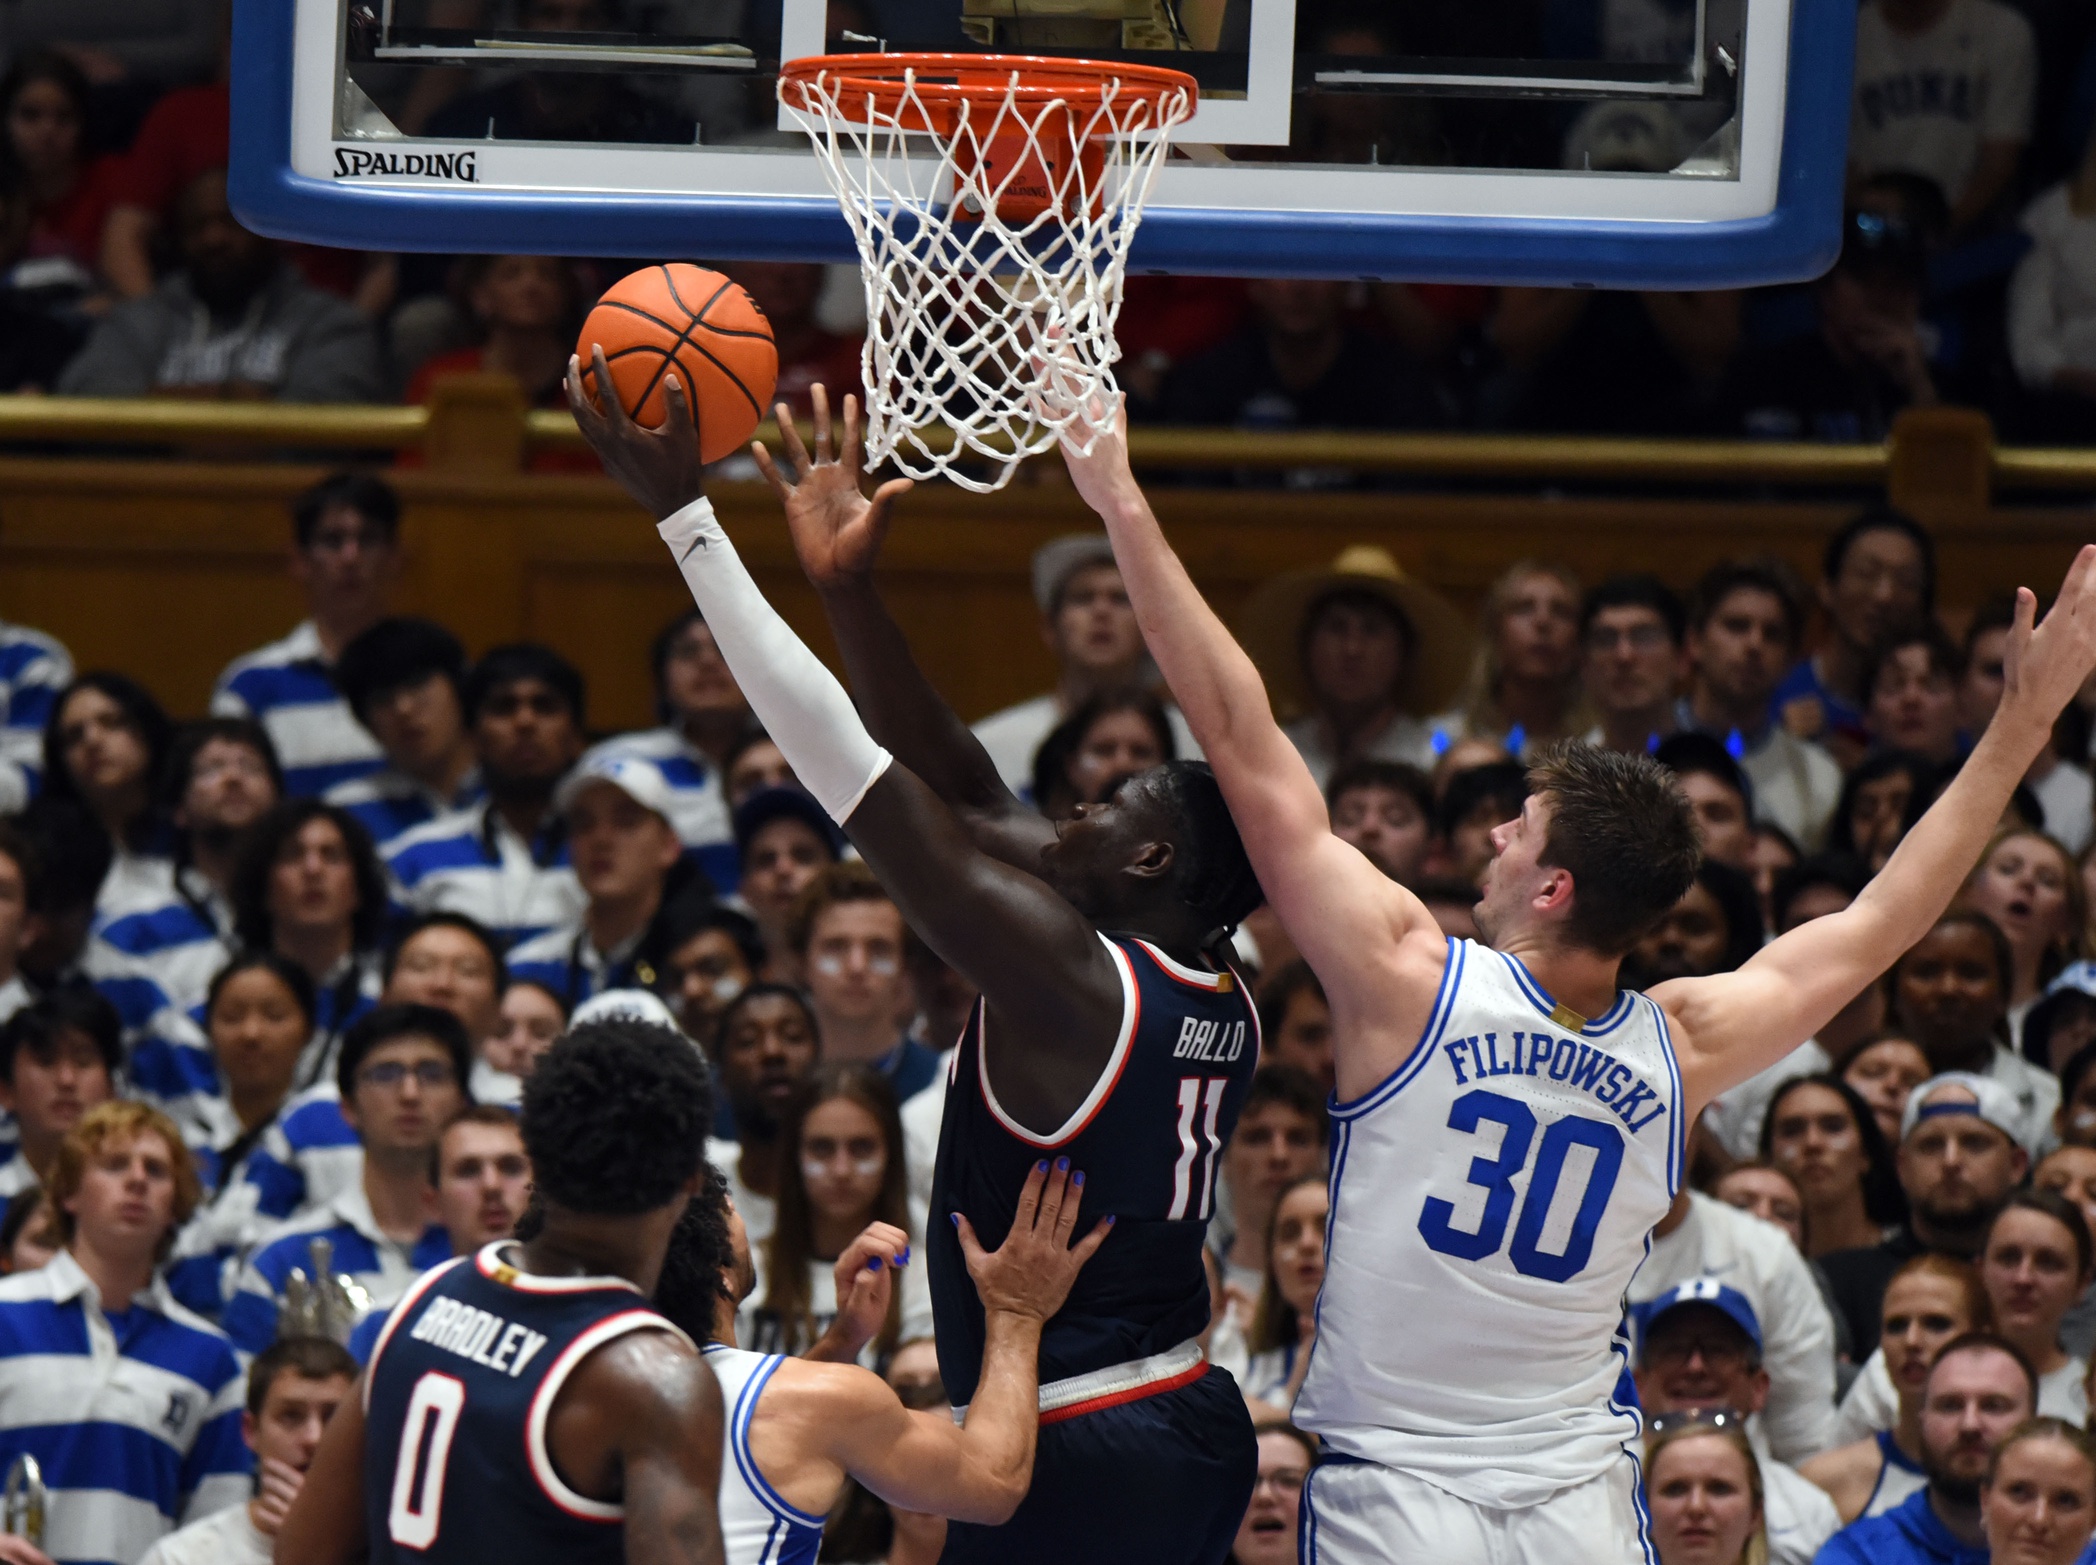 Duke fell to Arizona at Cameron Indoor in game two.